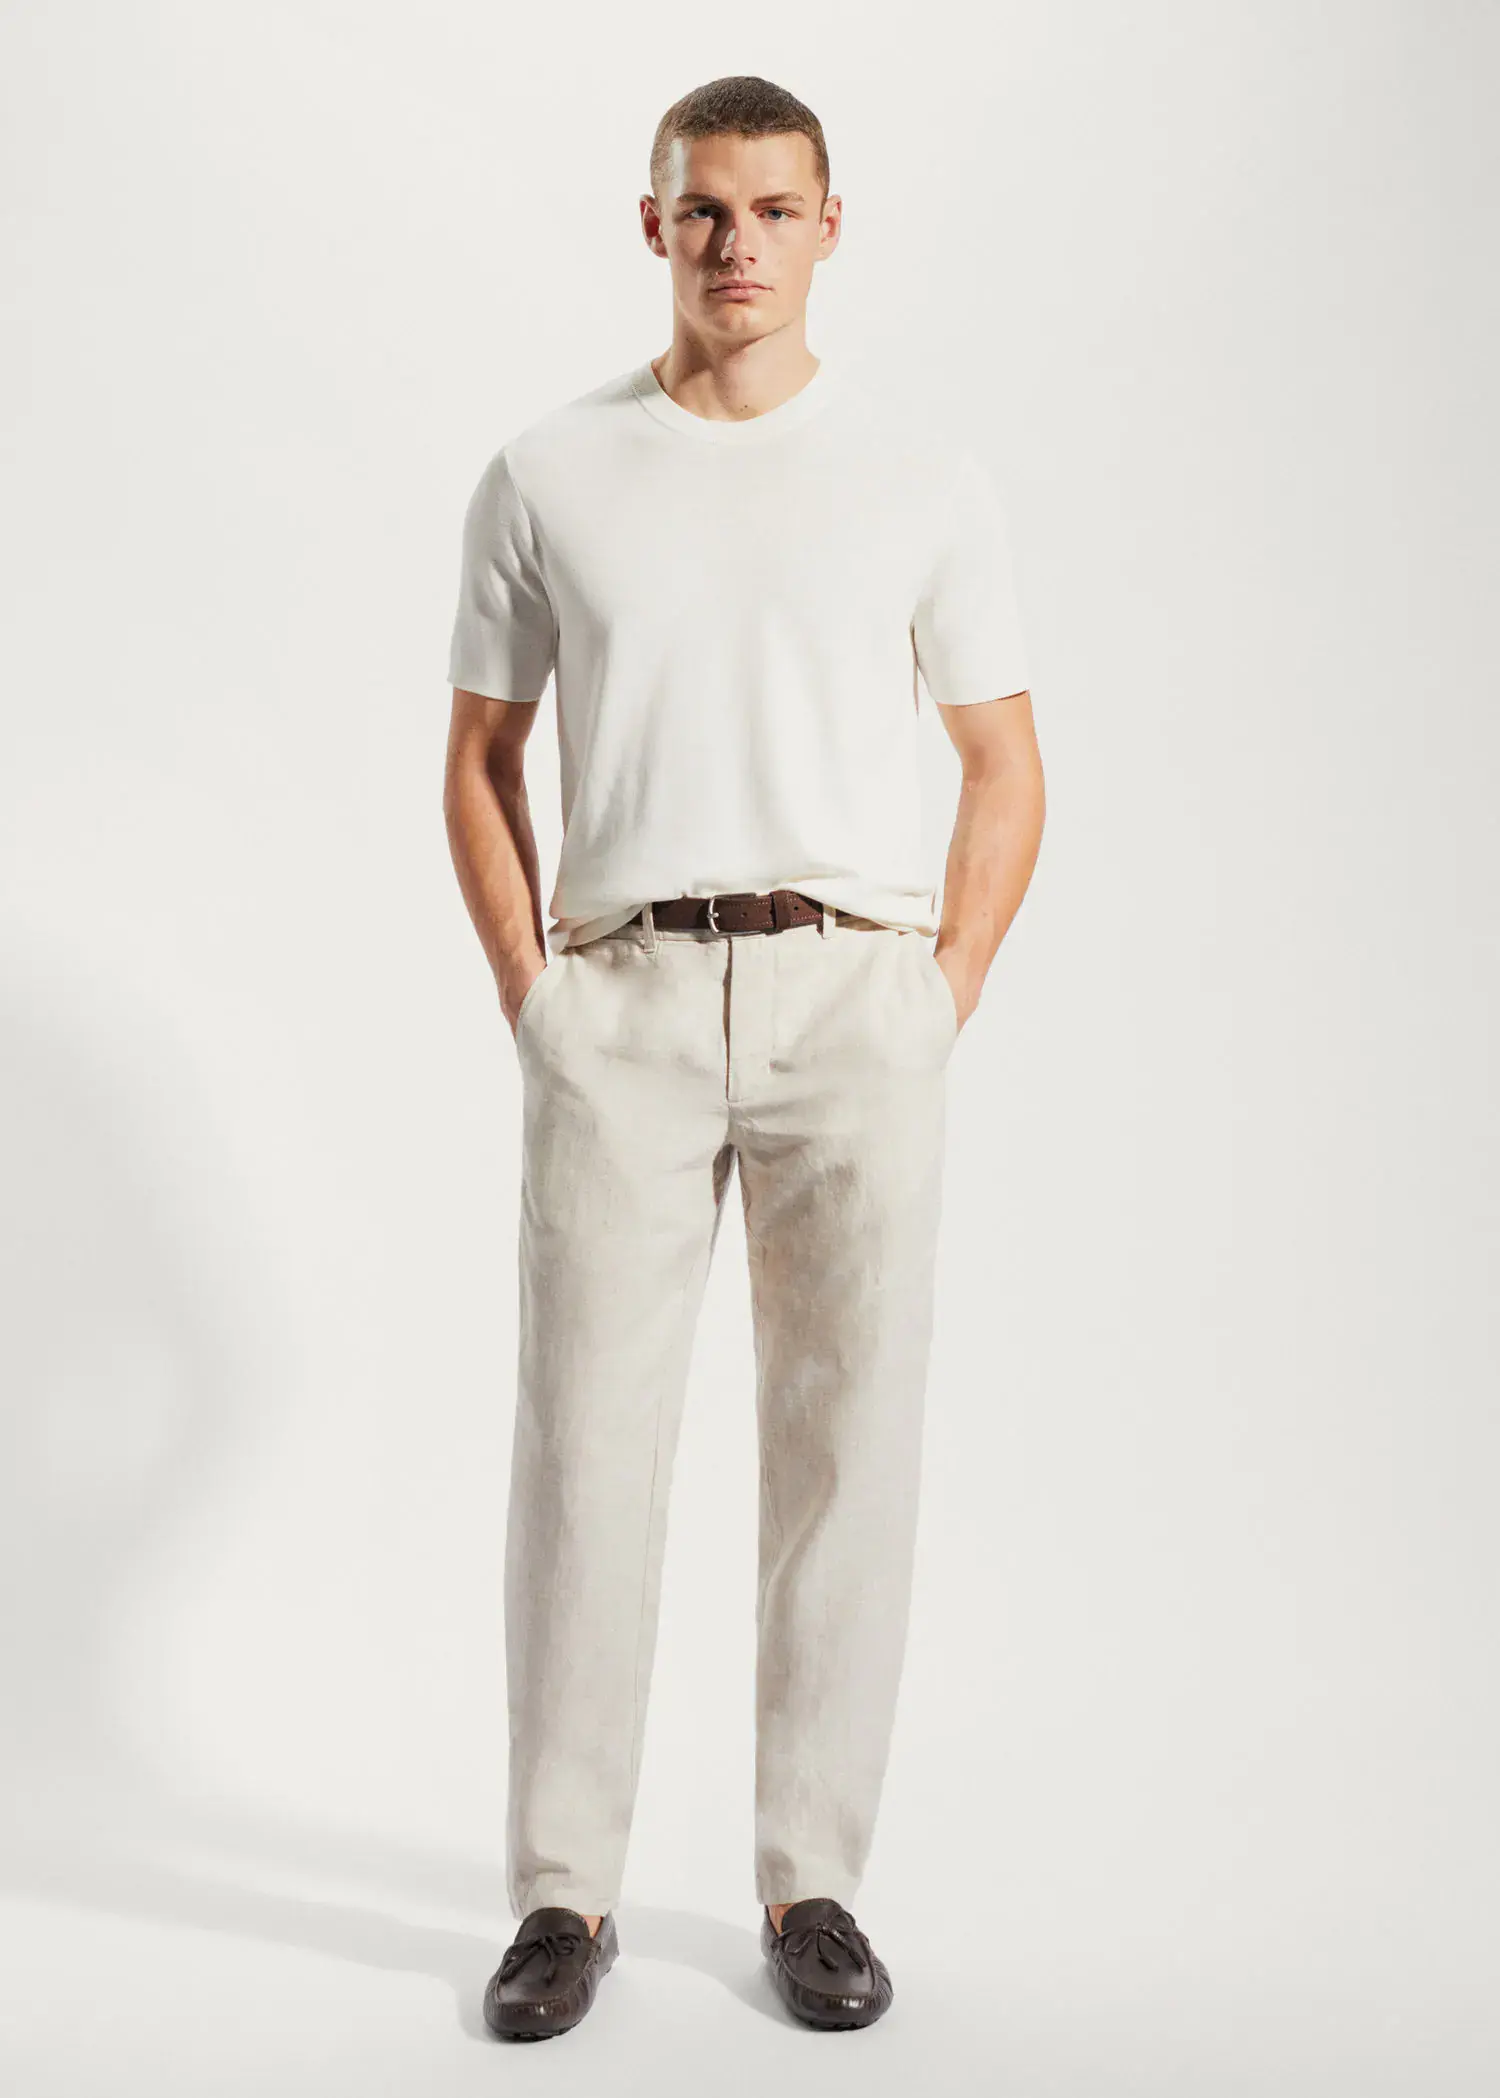 Blue Striped Mens Tapered Linen Pants Trousers Relaxed Fit | Linen trousers  men, Linen trousers, Mens linen